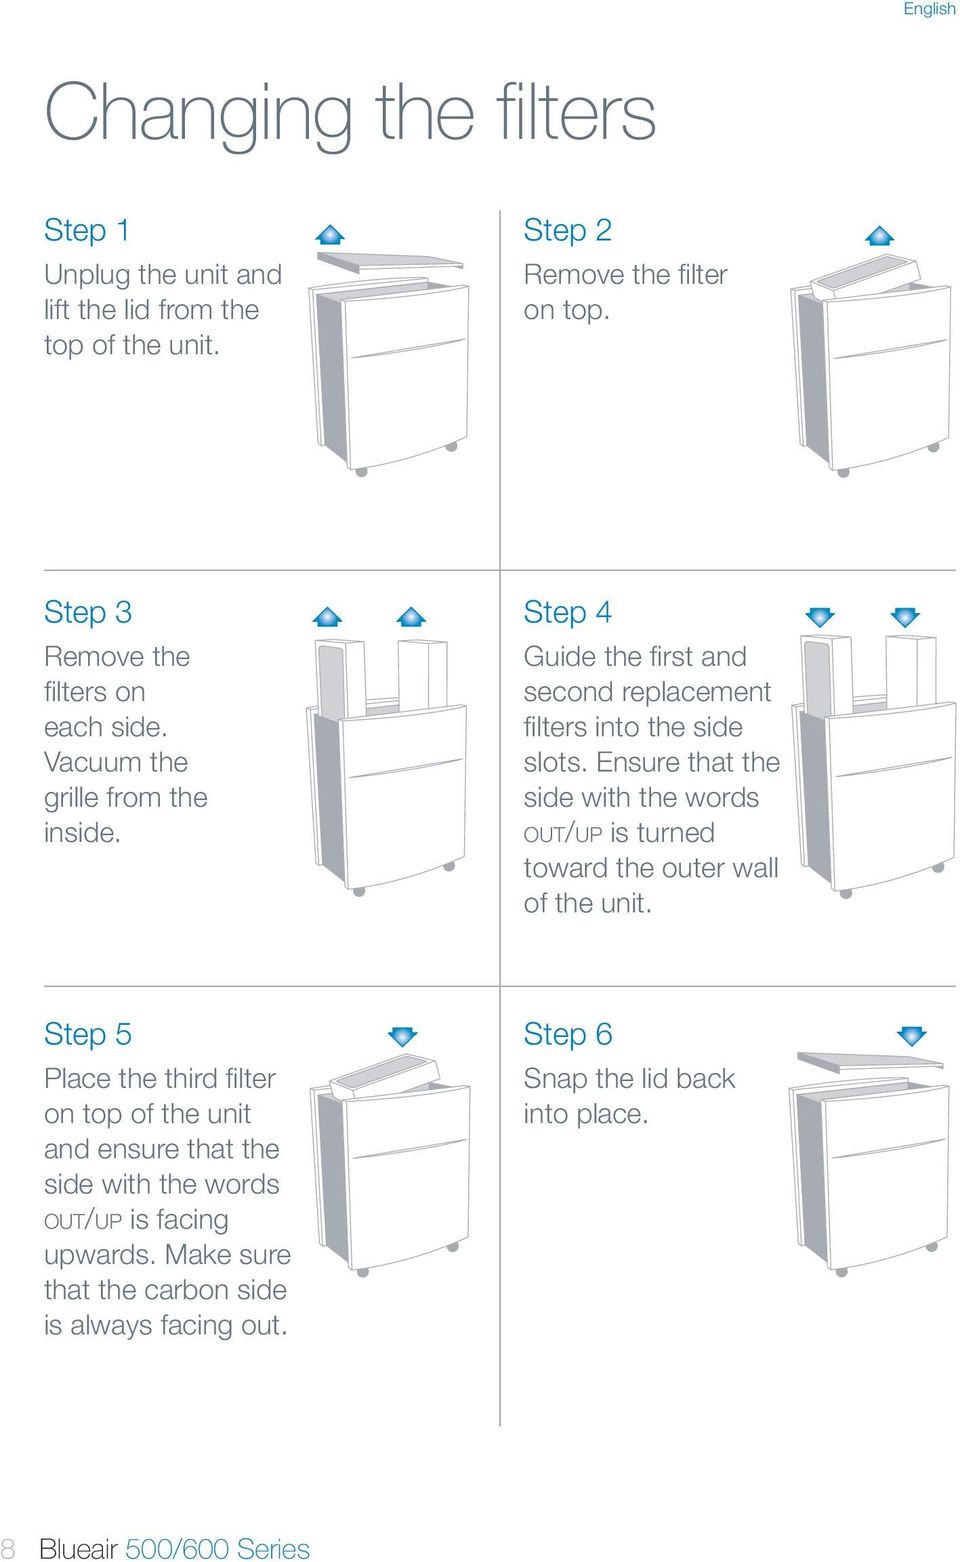 Ensure that the side with the words o u t/u p is turned toward the outer wall of the unit.